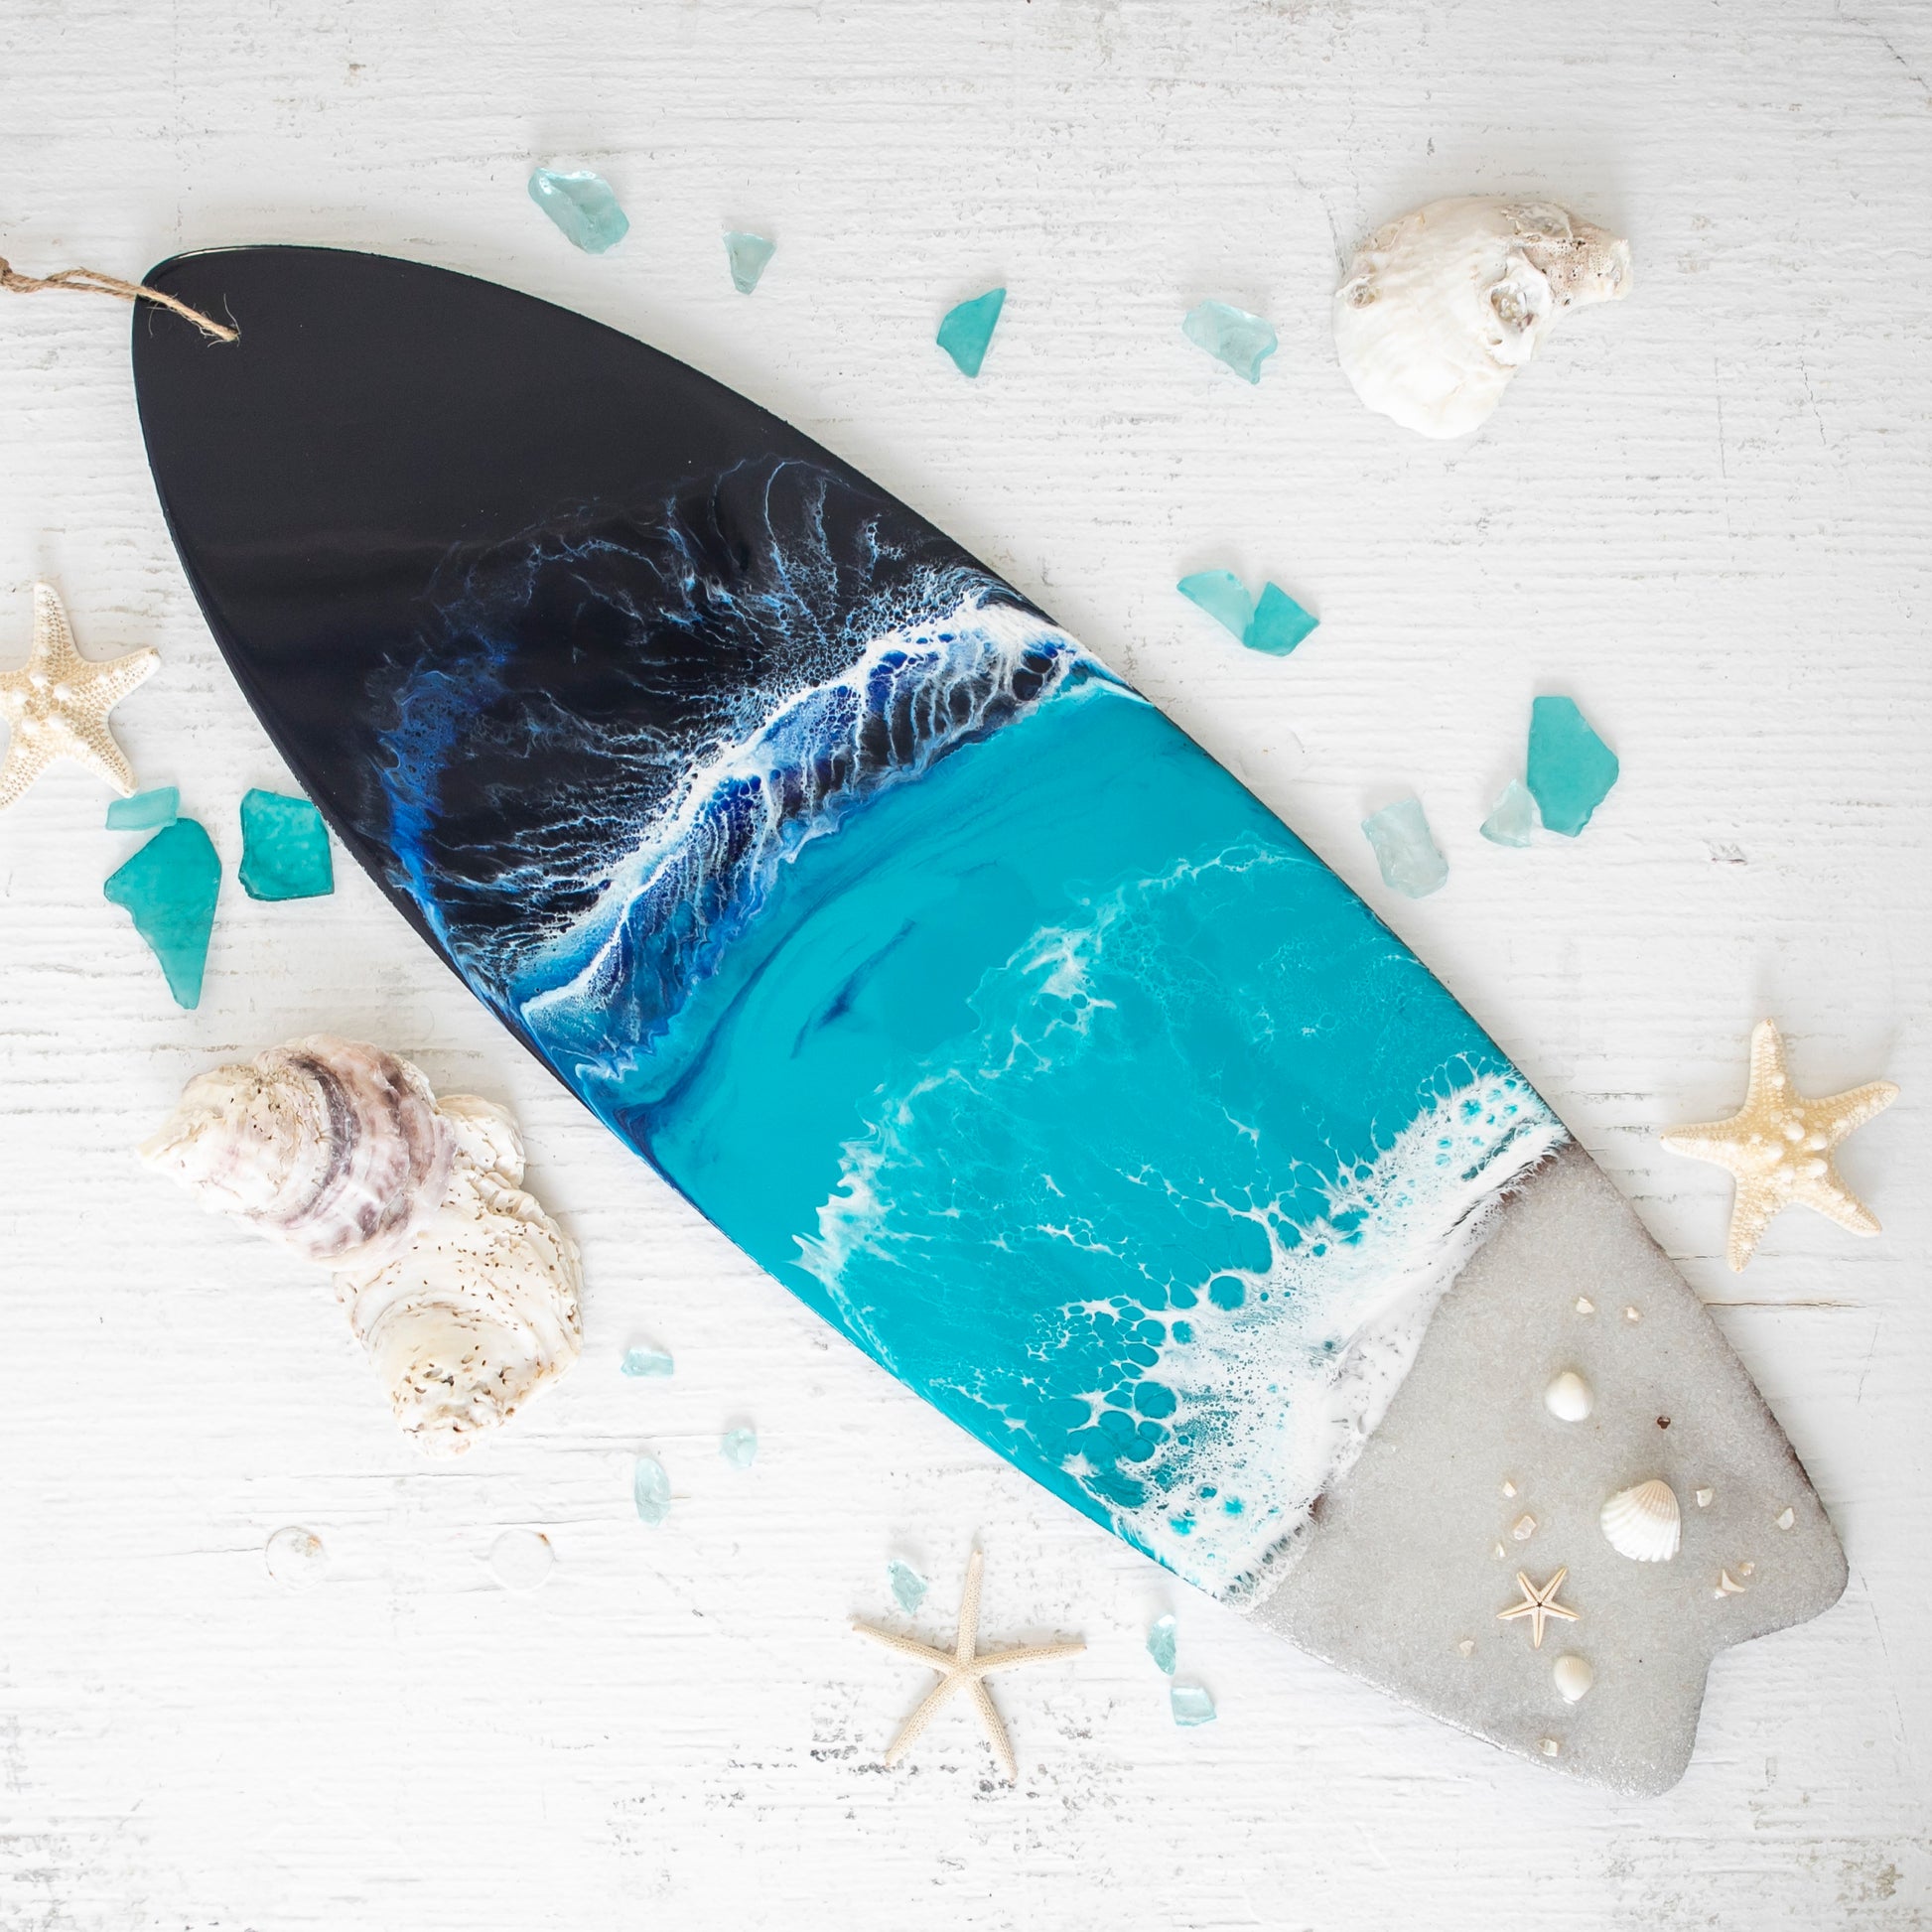 Artist Captures the Ocean in Her Wood and Resin Artwork and Decor